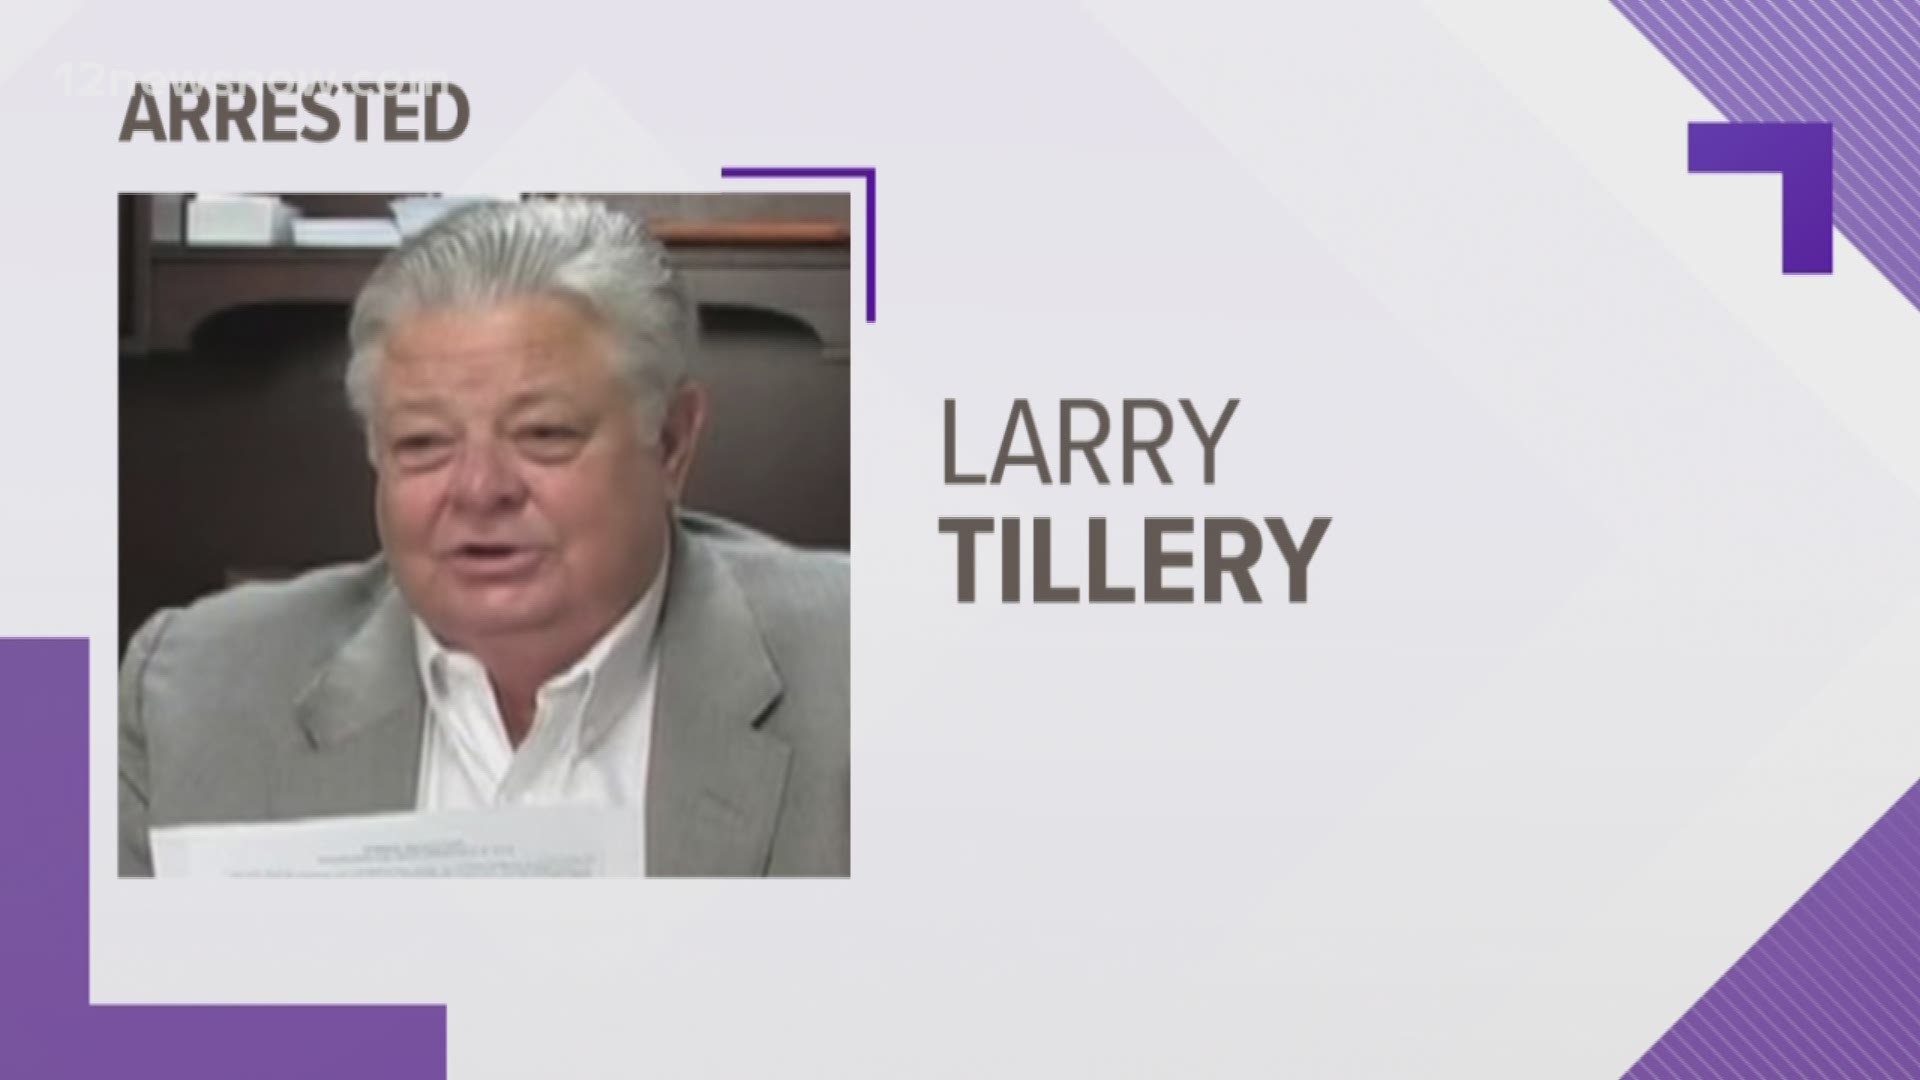 Larry Tillery will not be extradited according to a CPSO spokesperson.